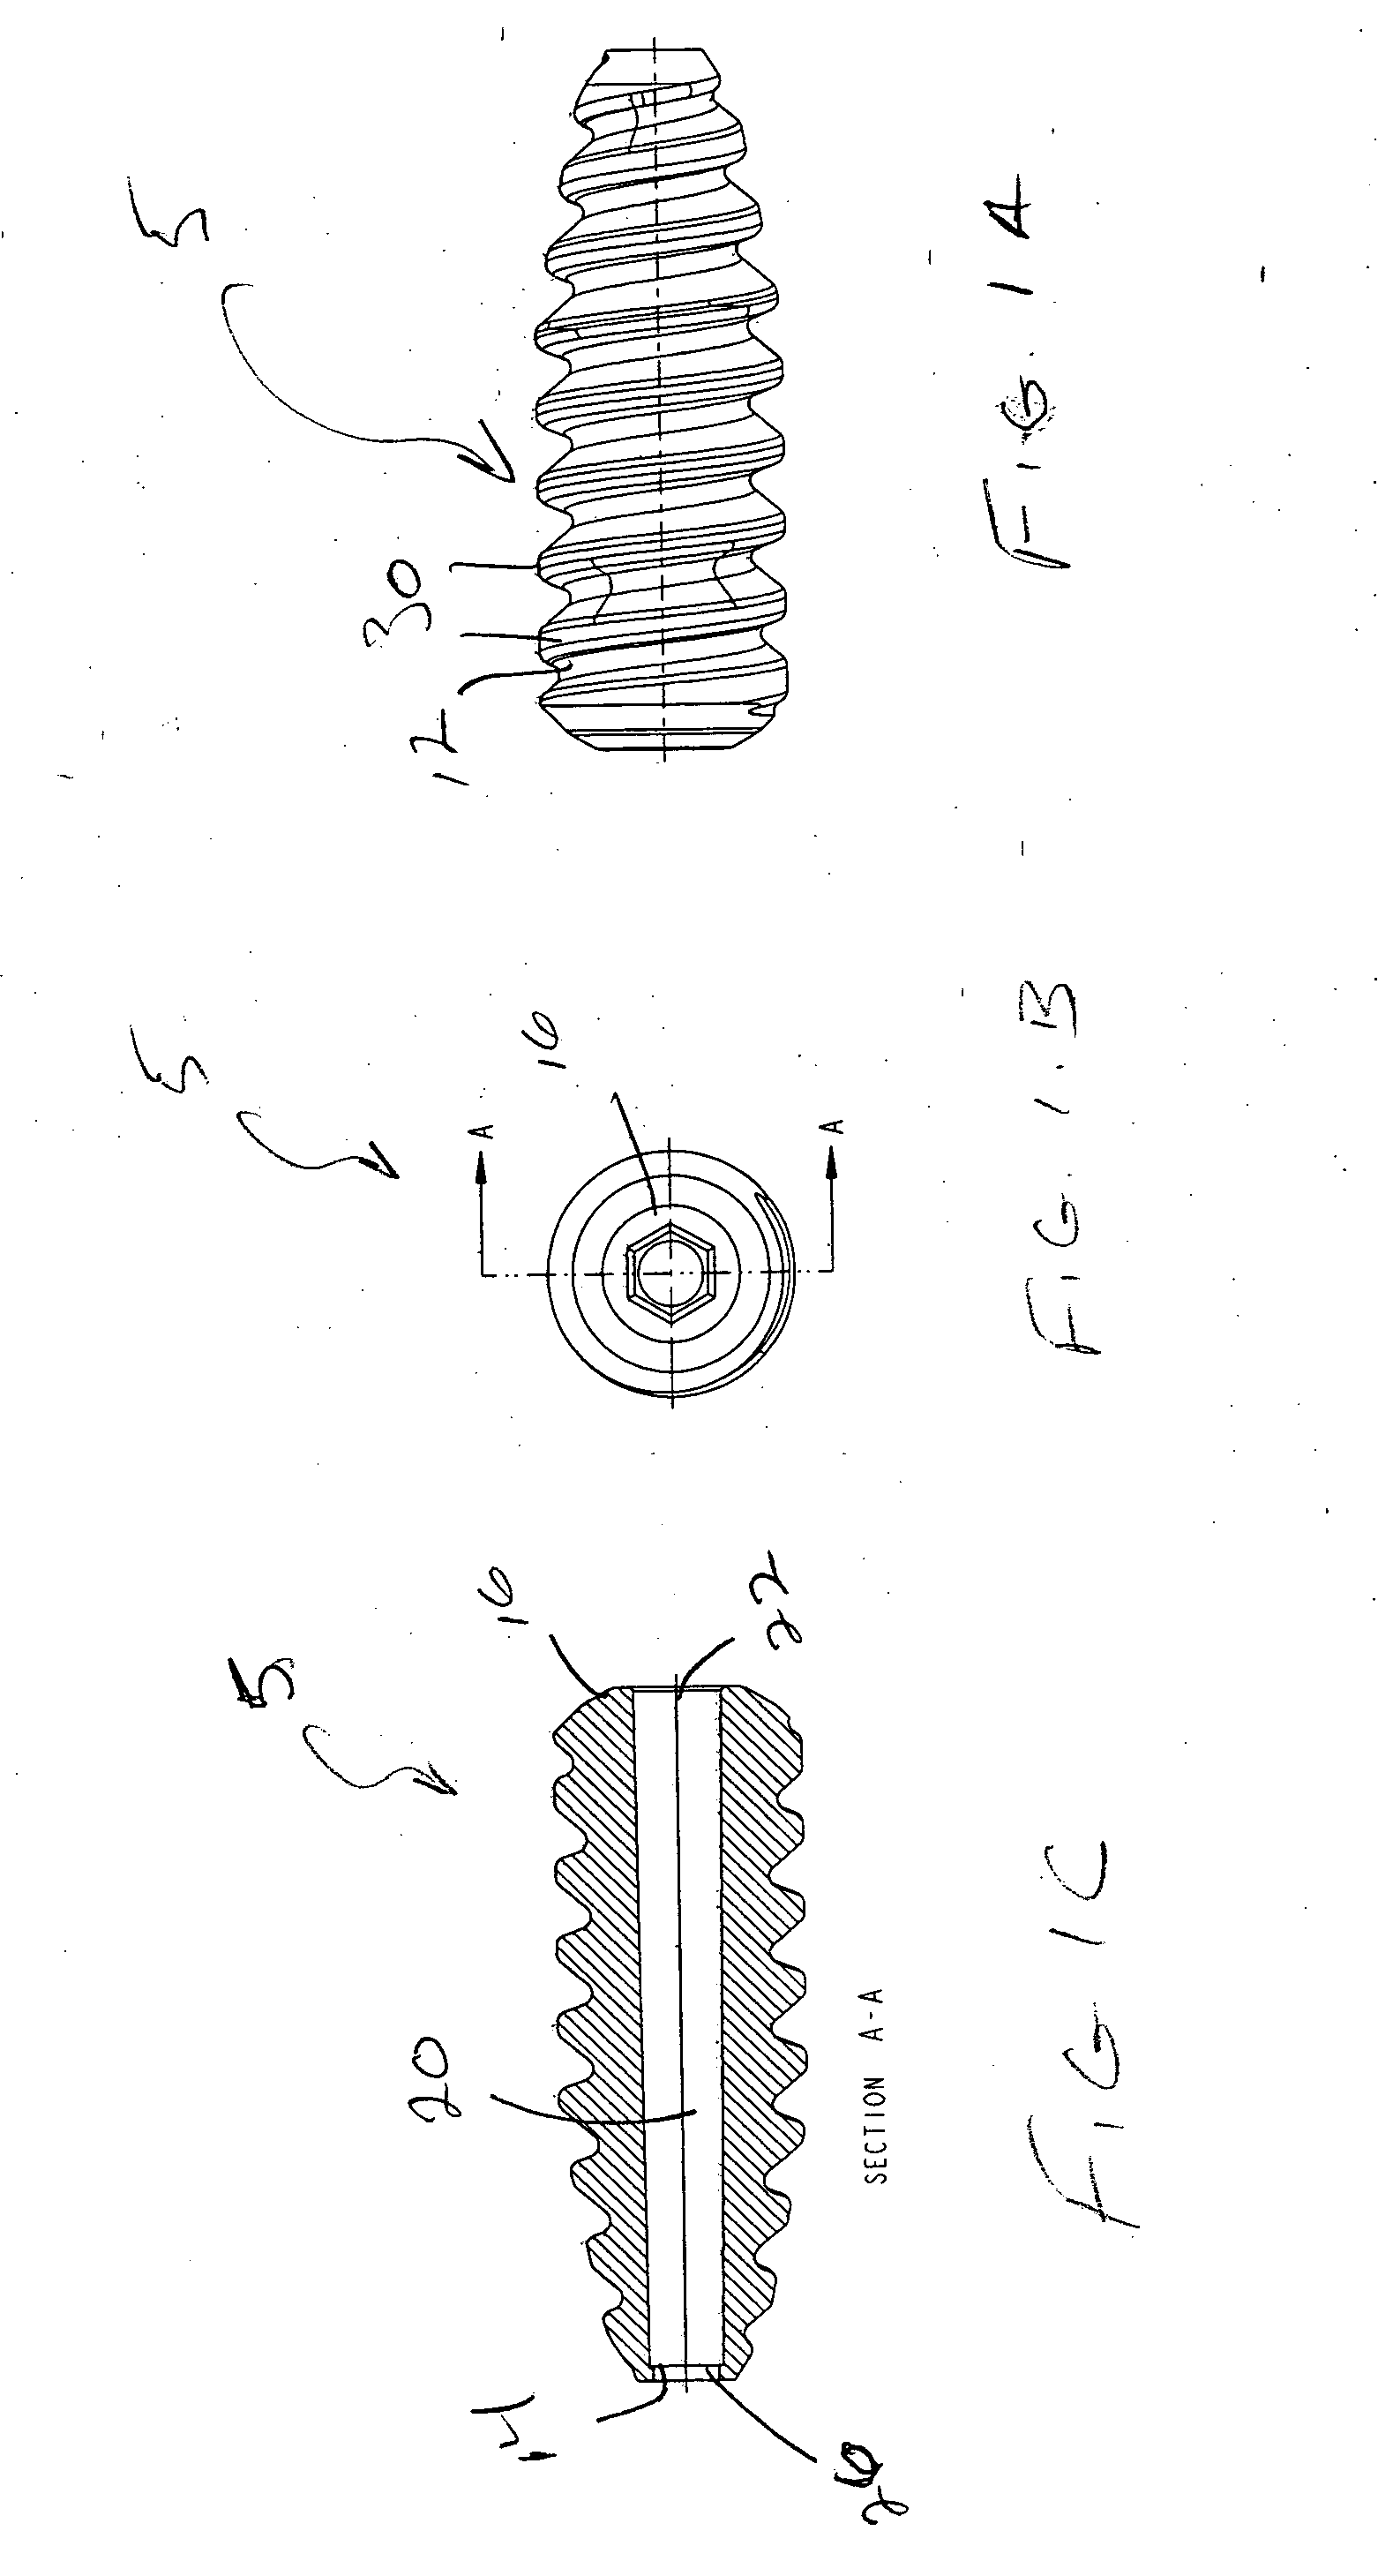 Method of performing anterior cruciate ligament reconstruction using biodegradable interference screw